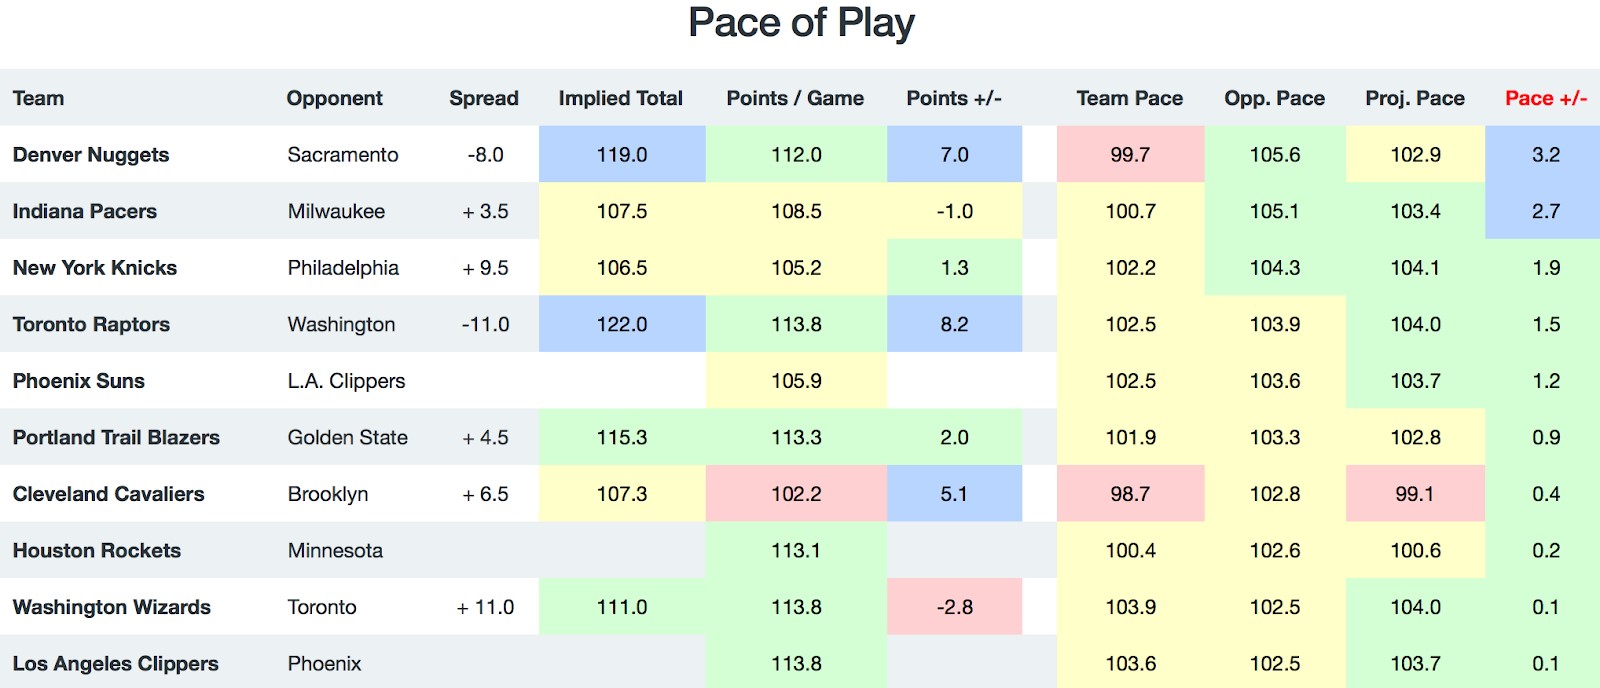 NBA Pace of Play